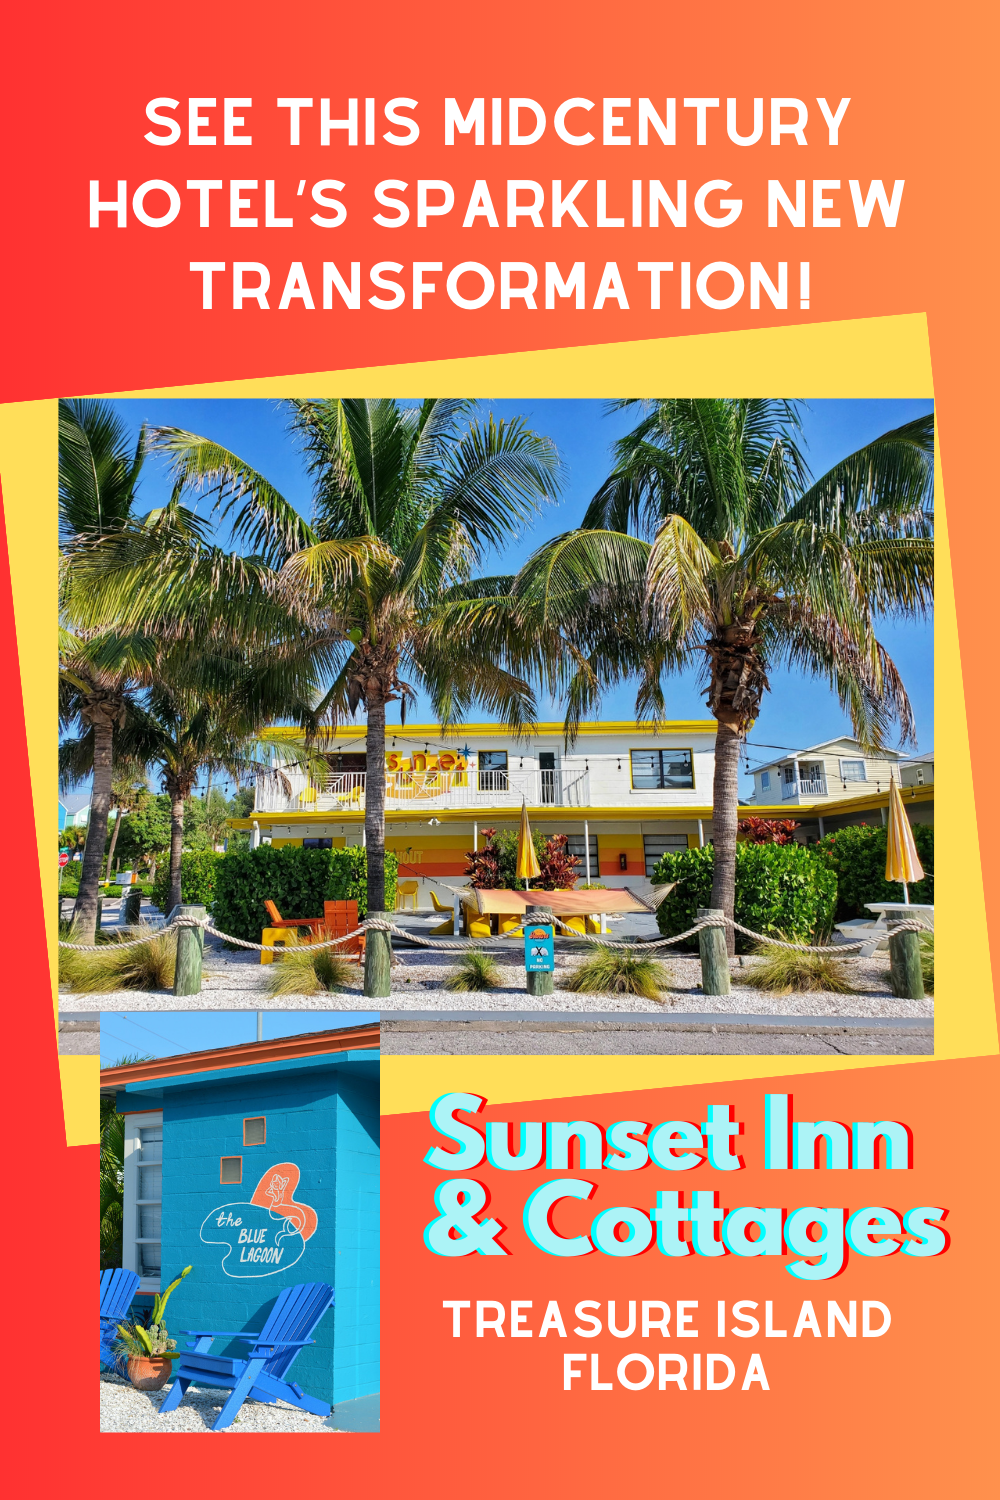 Sunset Inn & Cottages pin for Pinterest showing main hotel and colorful courtyard shaded by palm trees, and The Blue Lagoon cottage